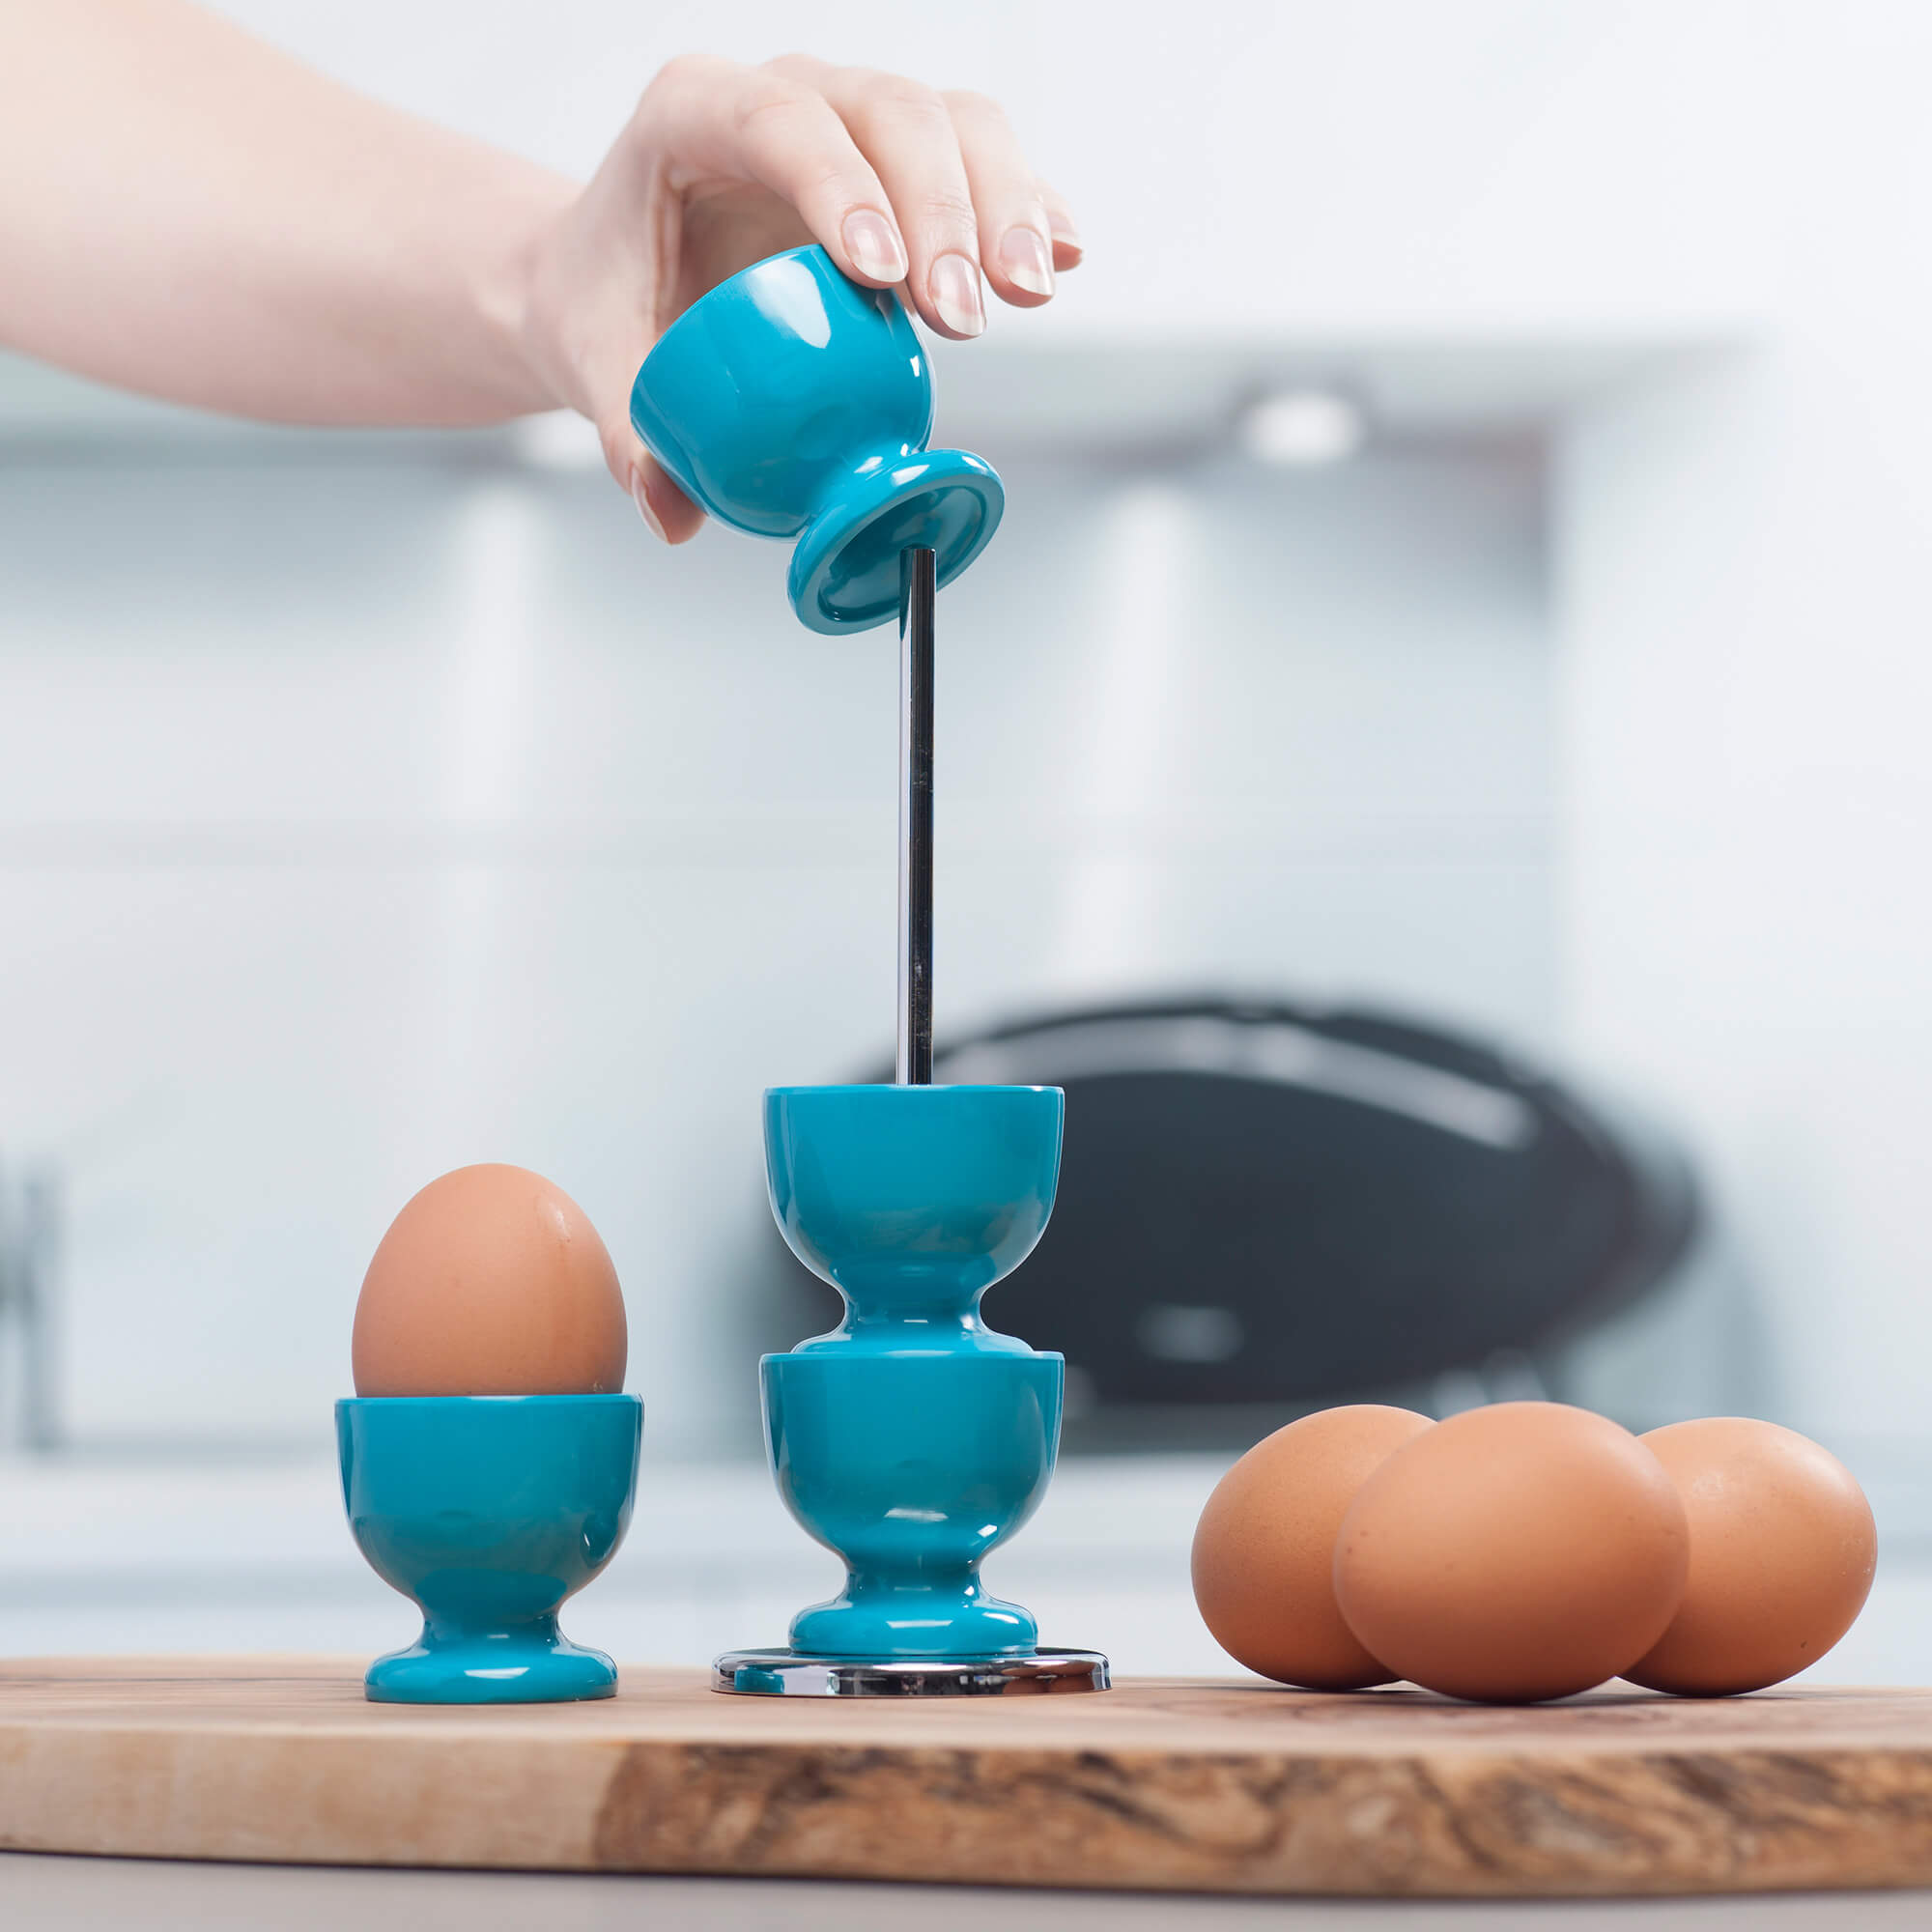 Stack and Store Egg Cups